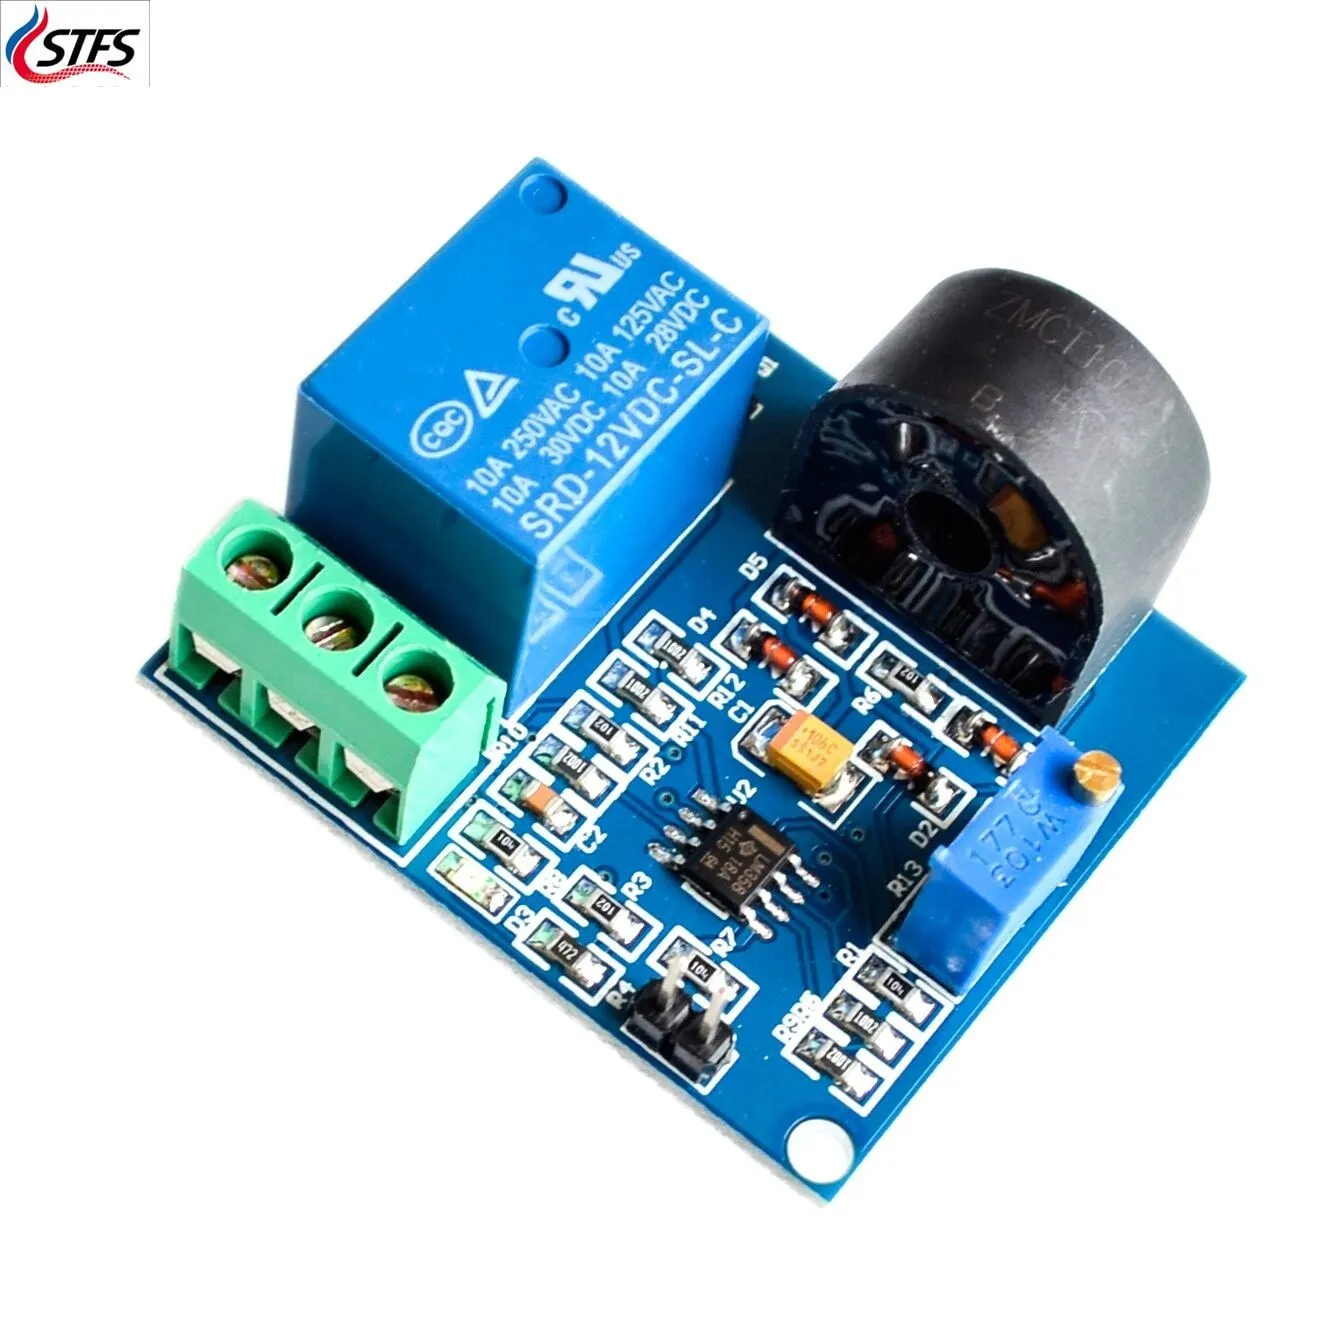 

AC Current Detection Sensor Module 12V Relay Protection Module 5A Over-Current Overcurrent Protection Switch Output